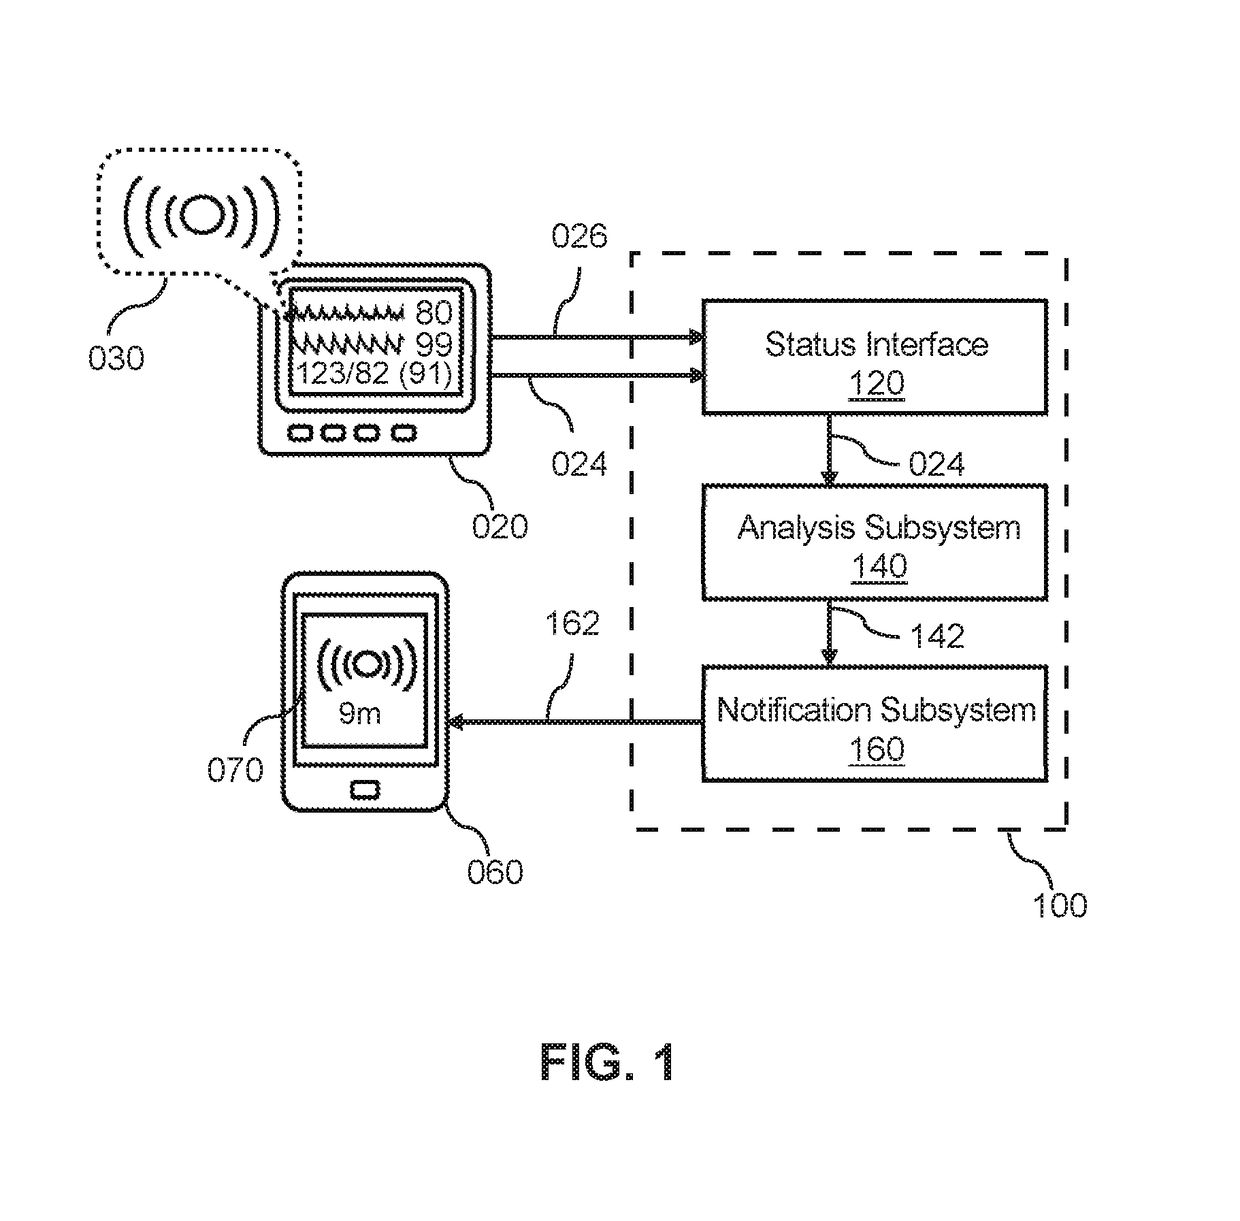 Processing status information of a medical device